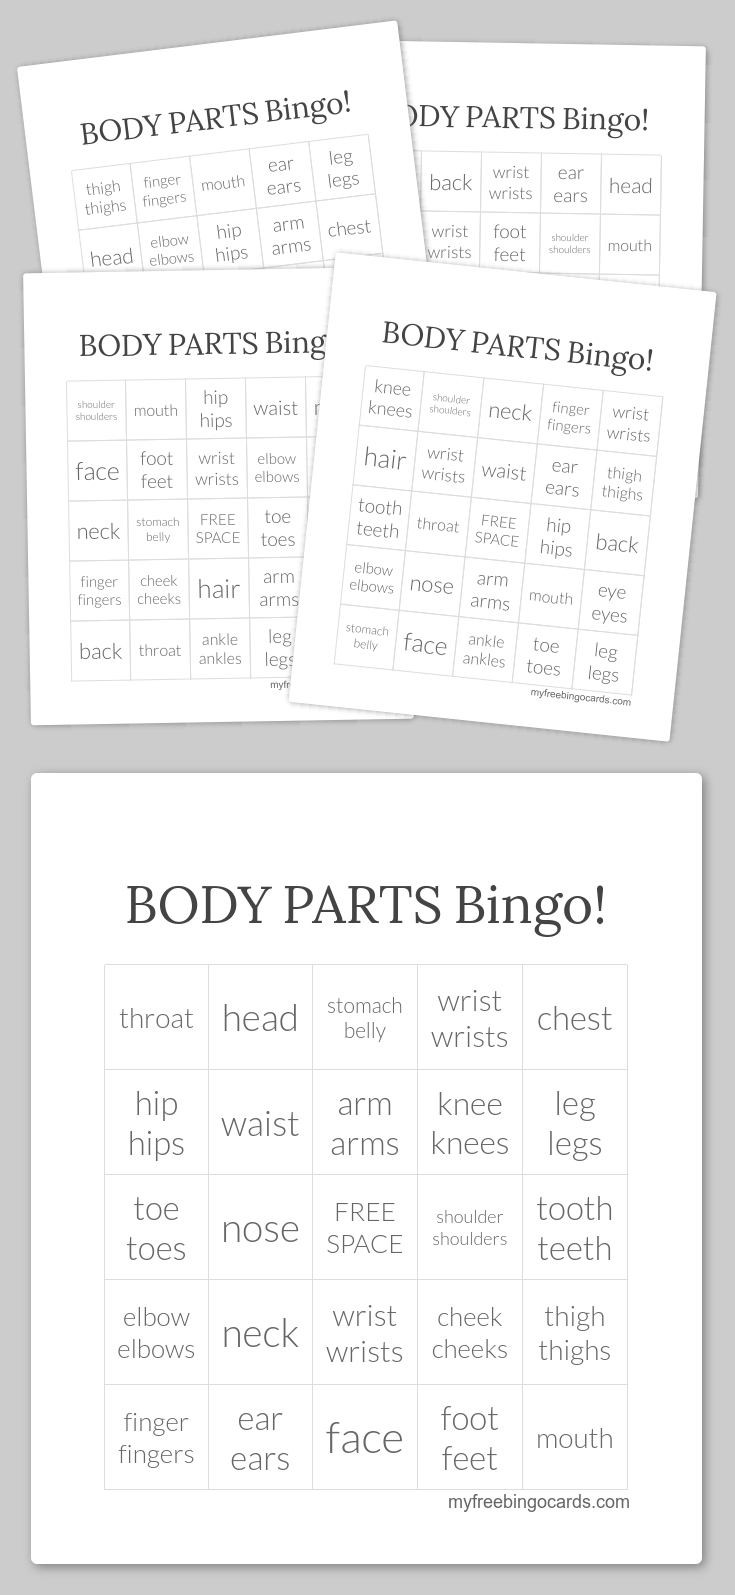 Body Parts Bingo! - 30 Cards And Callers Card In Pdf